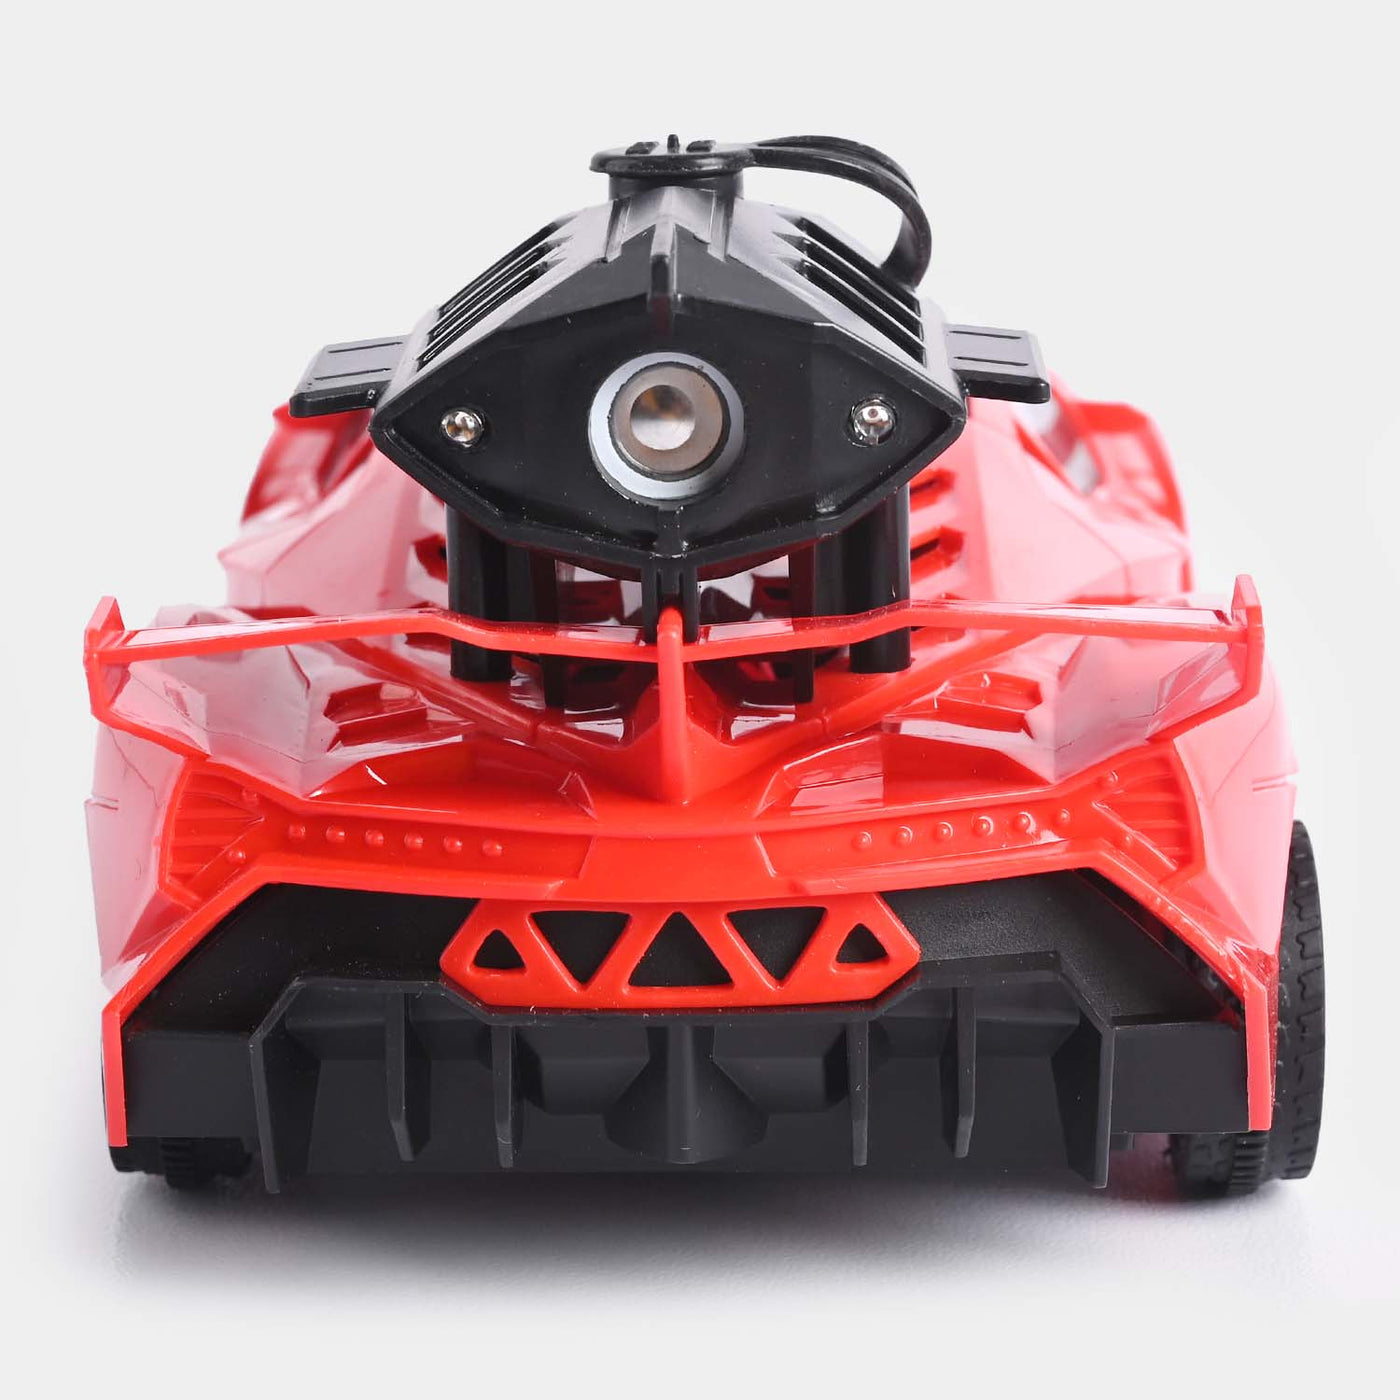 Remote Control Car With Spray Function For Kids